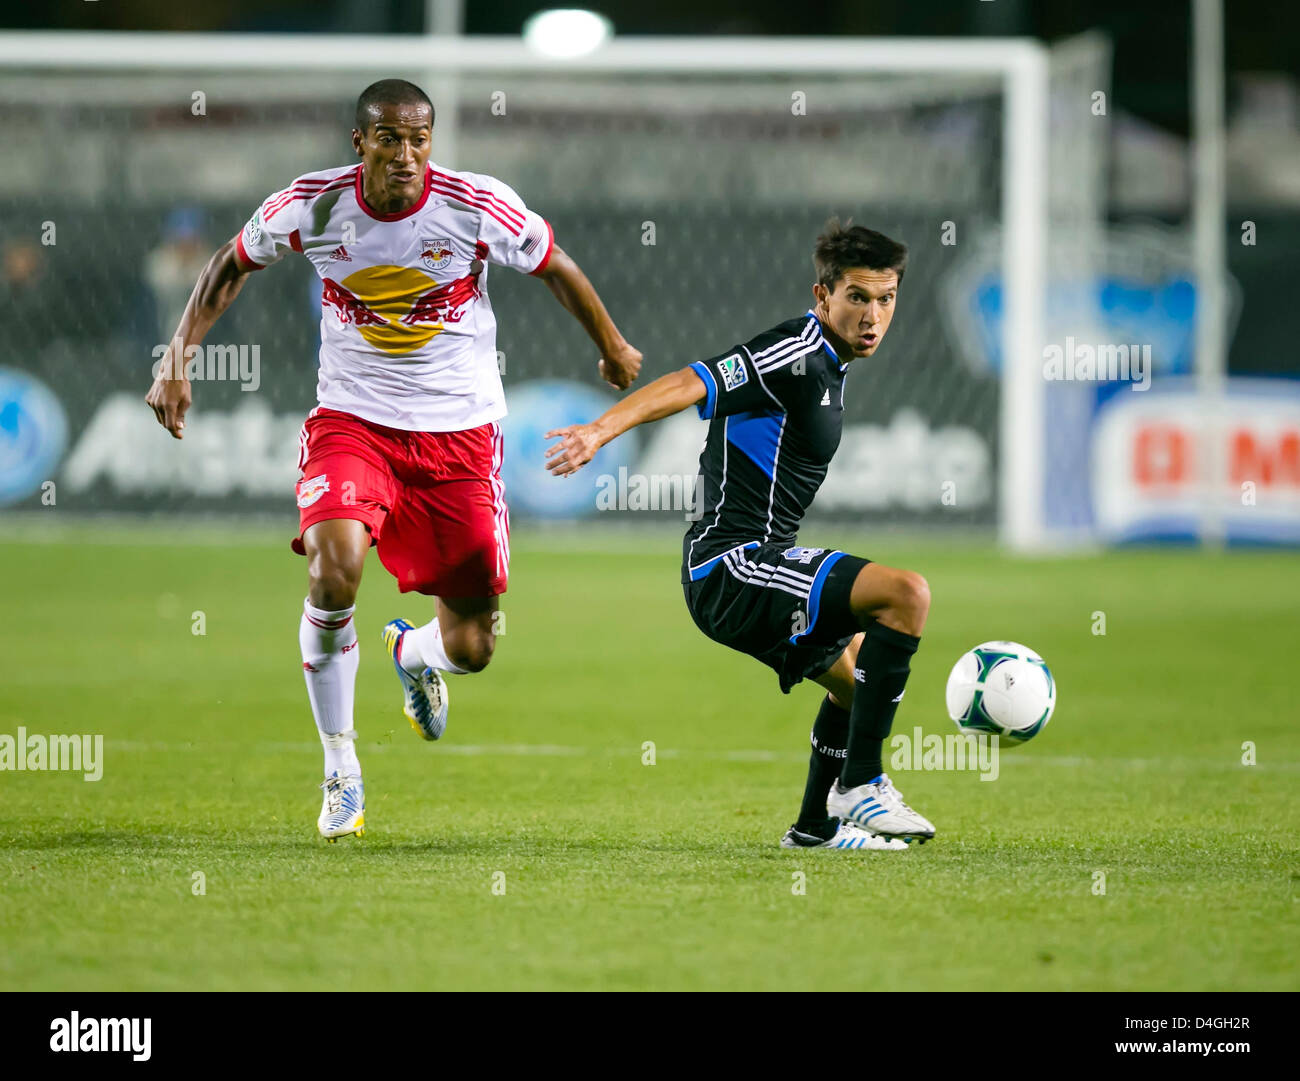 March 10, 2013: New York Red Bulls defender Roy Miller (7) and San Jose Earthquakes midfielder Shea Salinas (6) in action during the MLS game between the New York Red Bulls and the San Jose Earthquakes at Buck Shaw Stadium in Santa Clara CA. San Jose defeated New York 2-1. Stock Photo